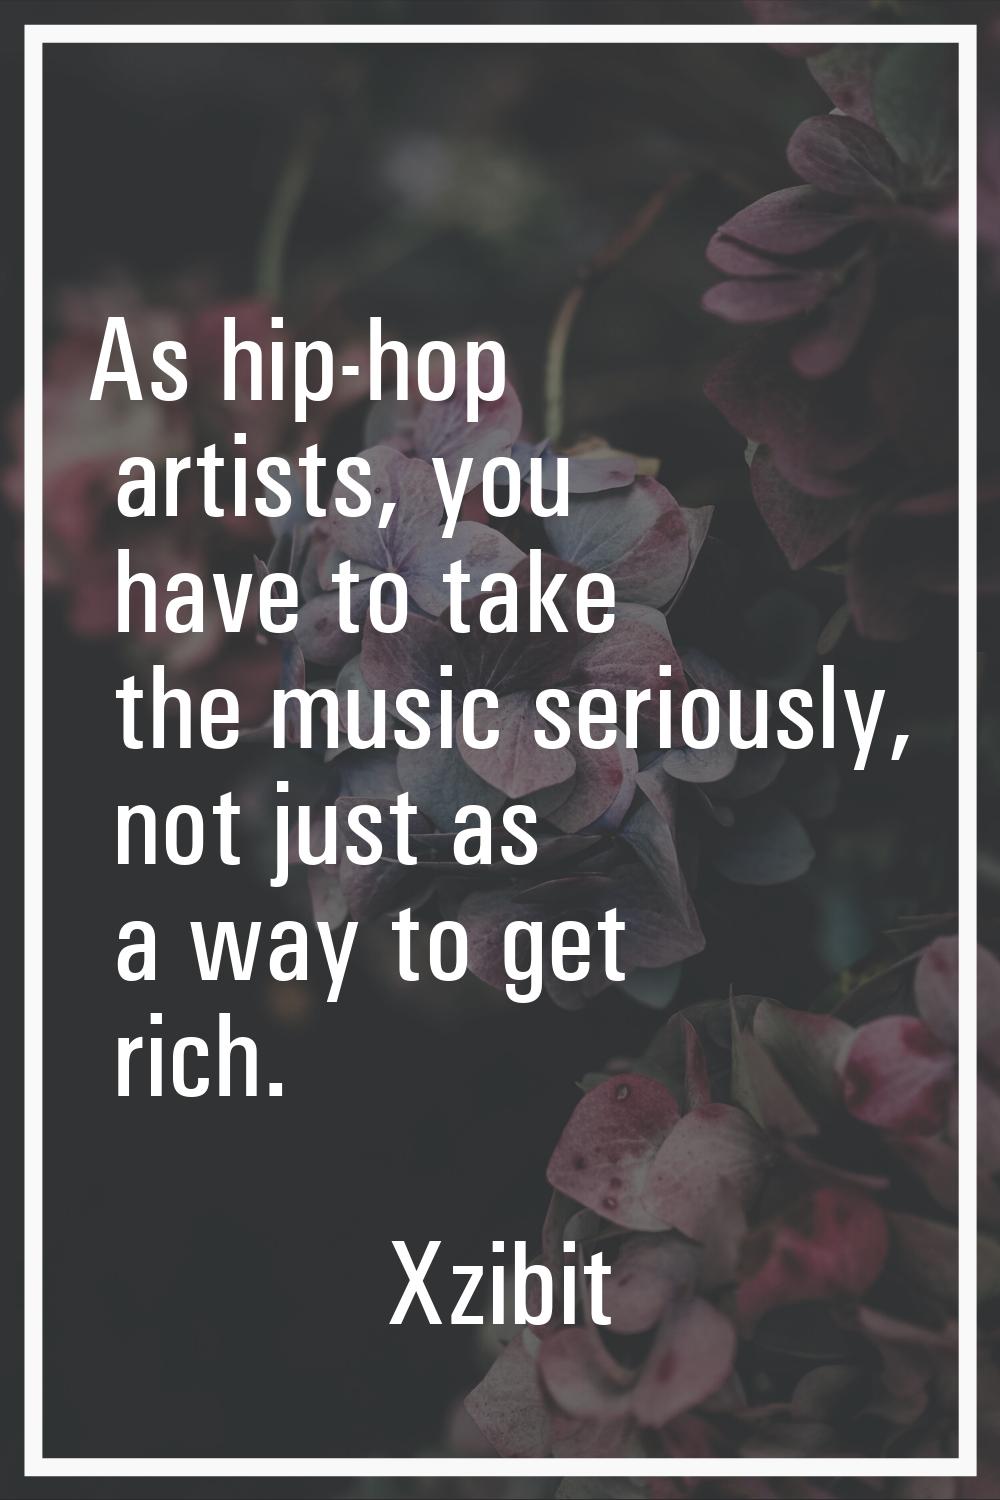 As hip-hop artists, you have to take the music seriously, not just as a way to get rich.